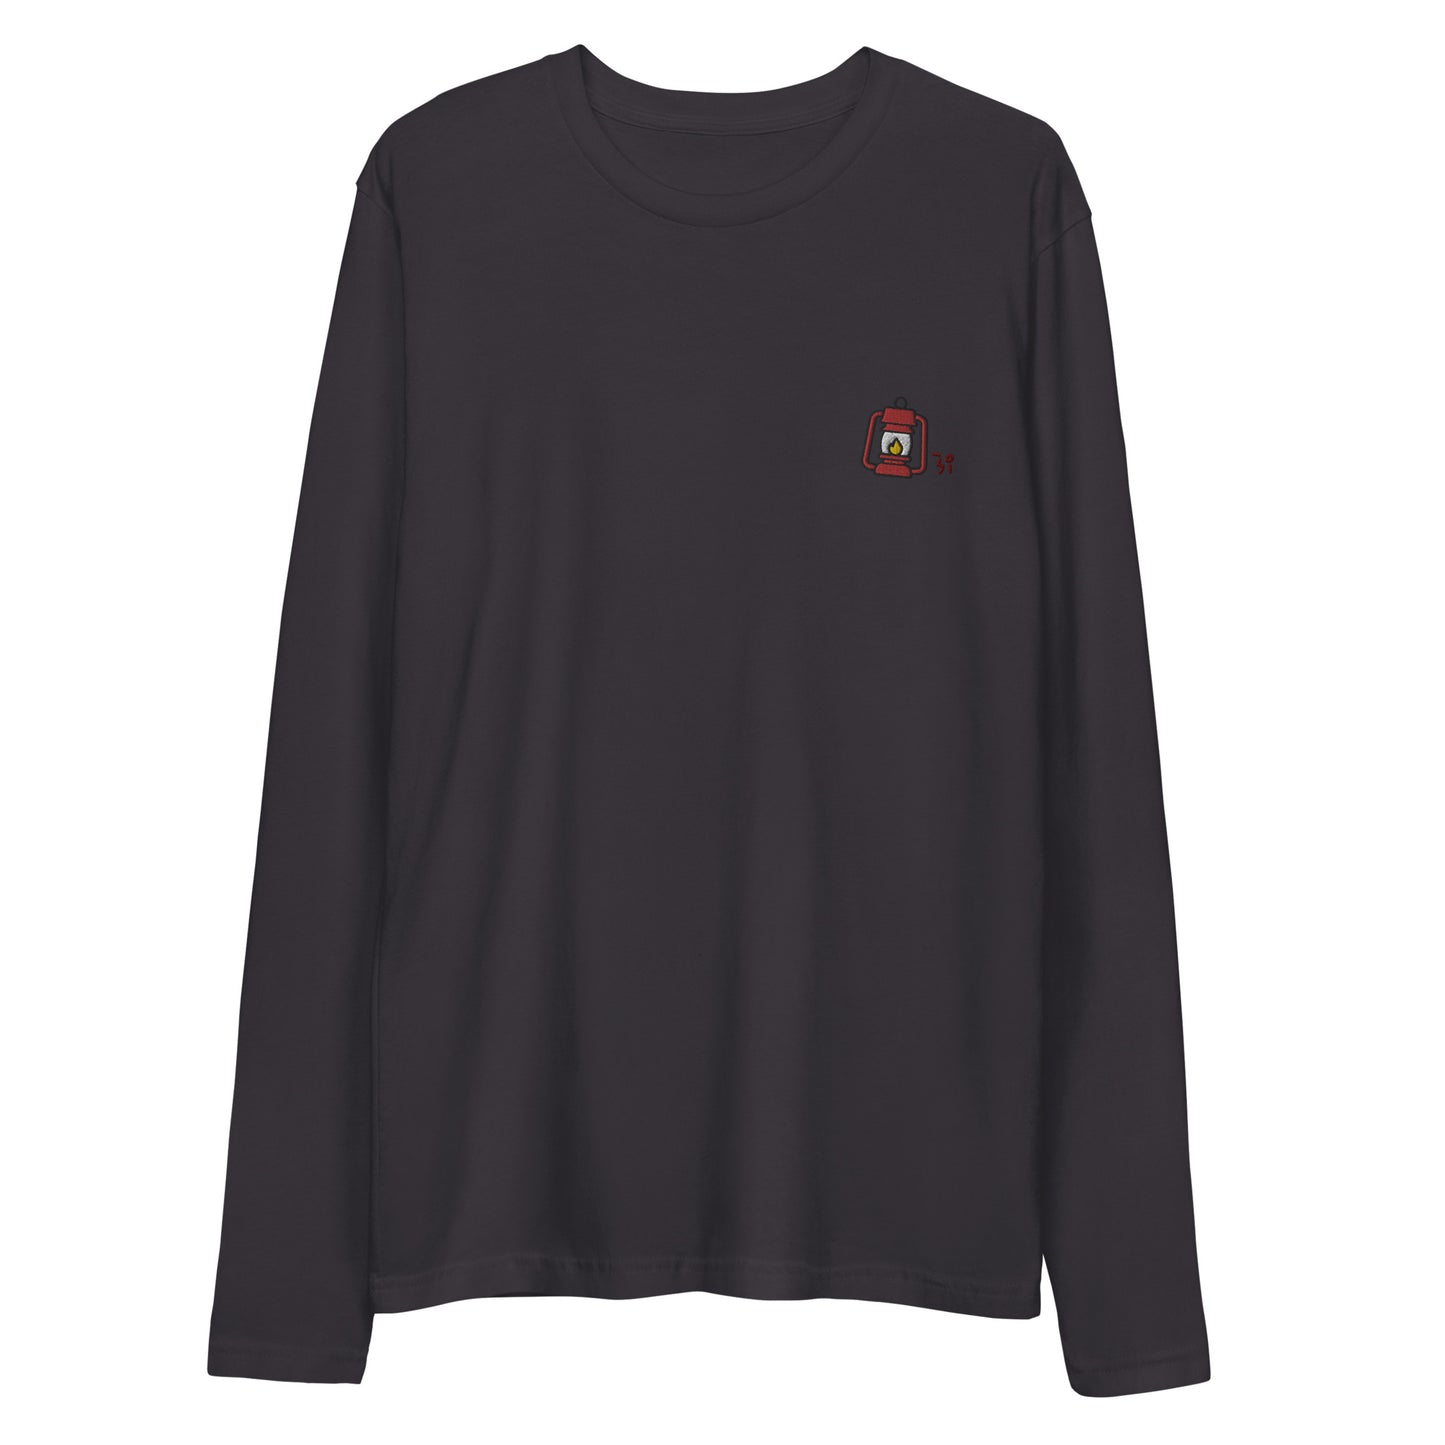 Camp lantern Long Sleeve Fitted Crew